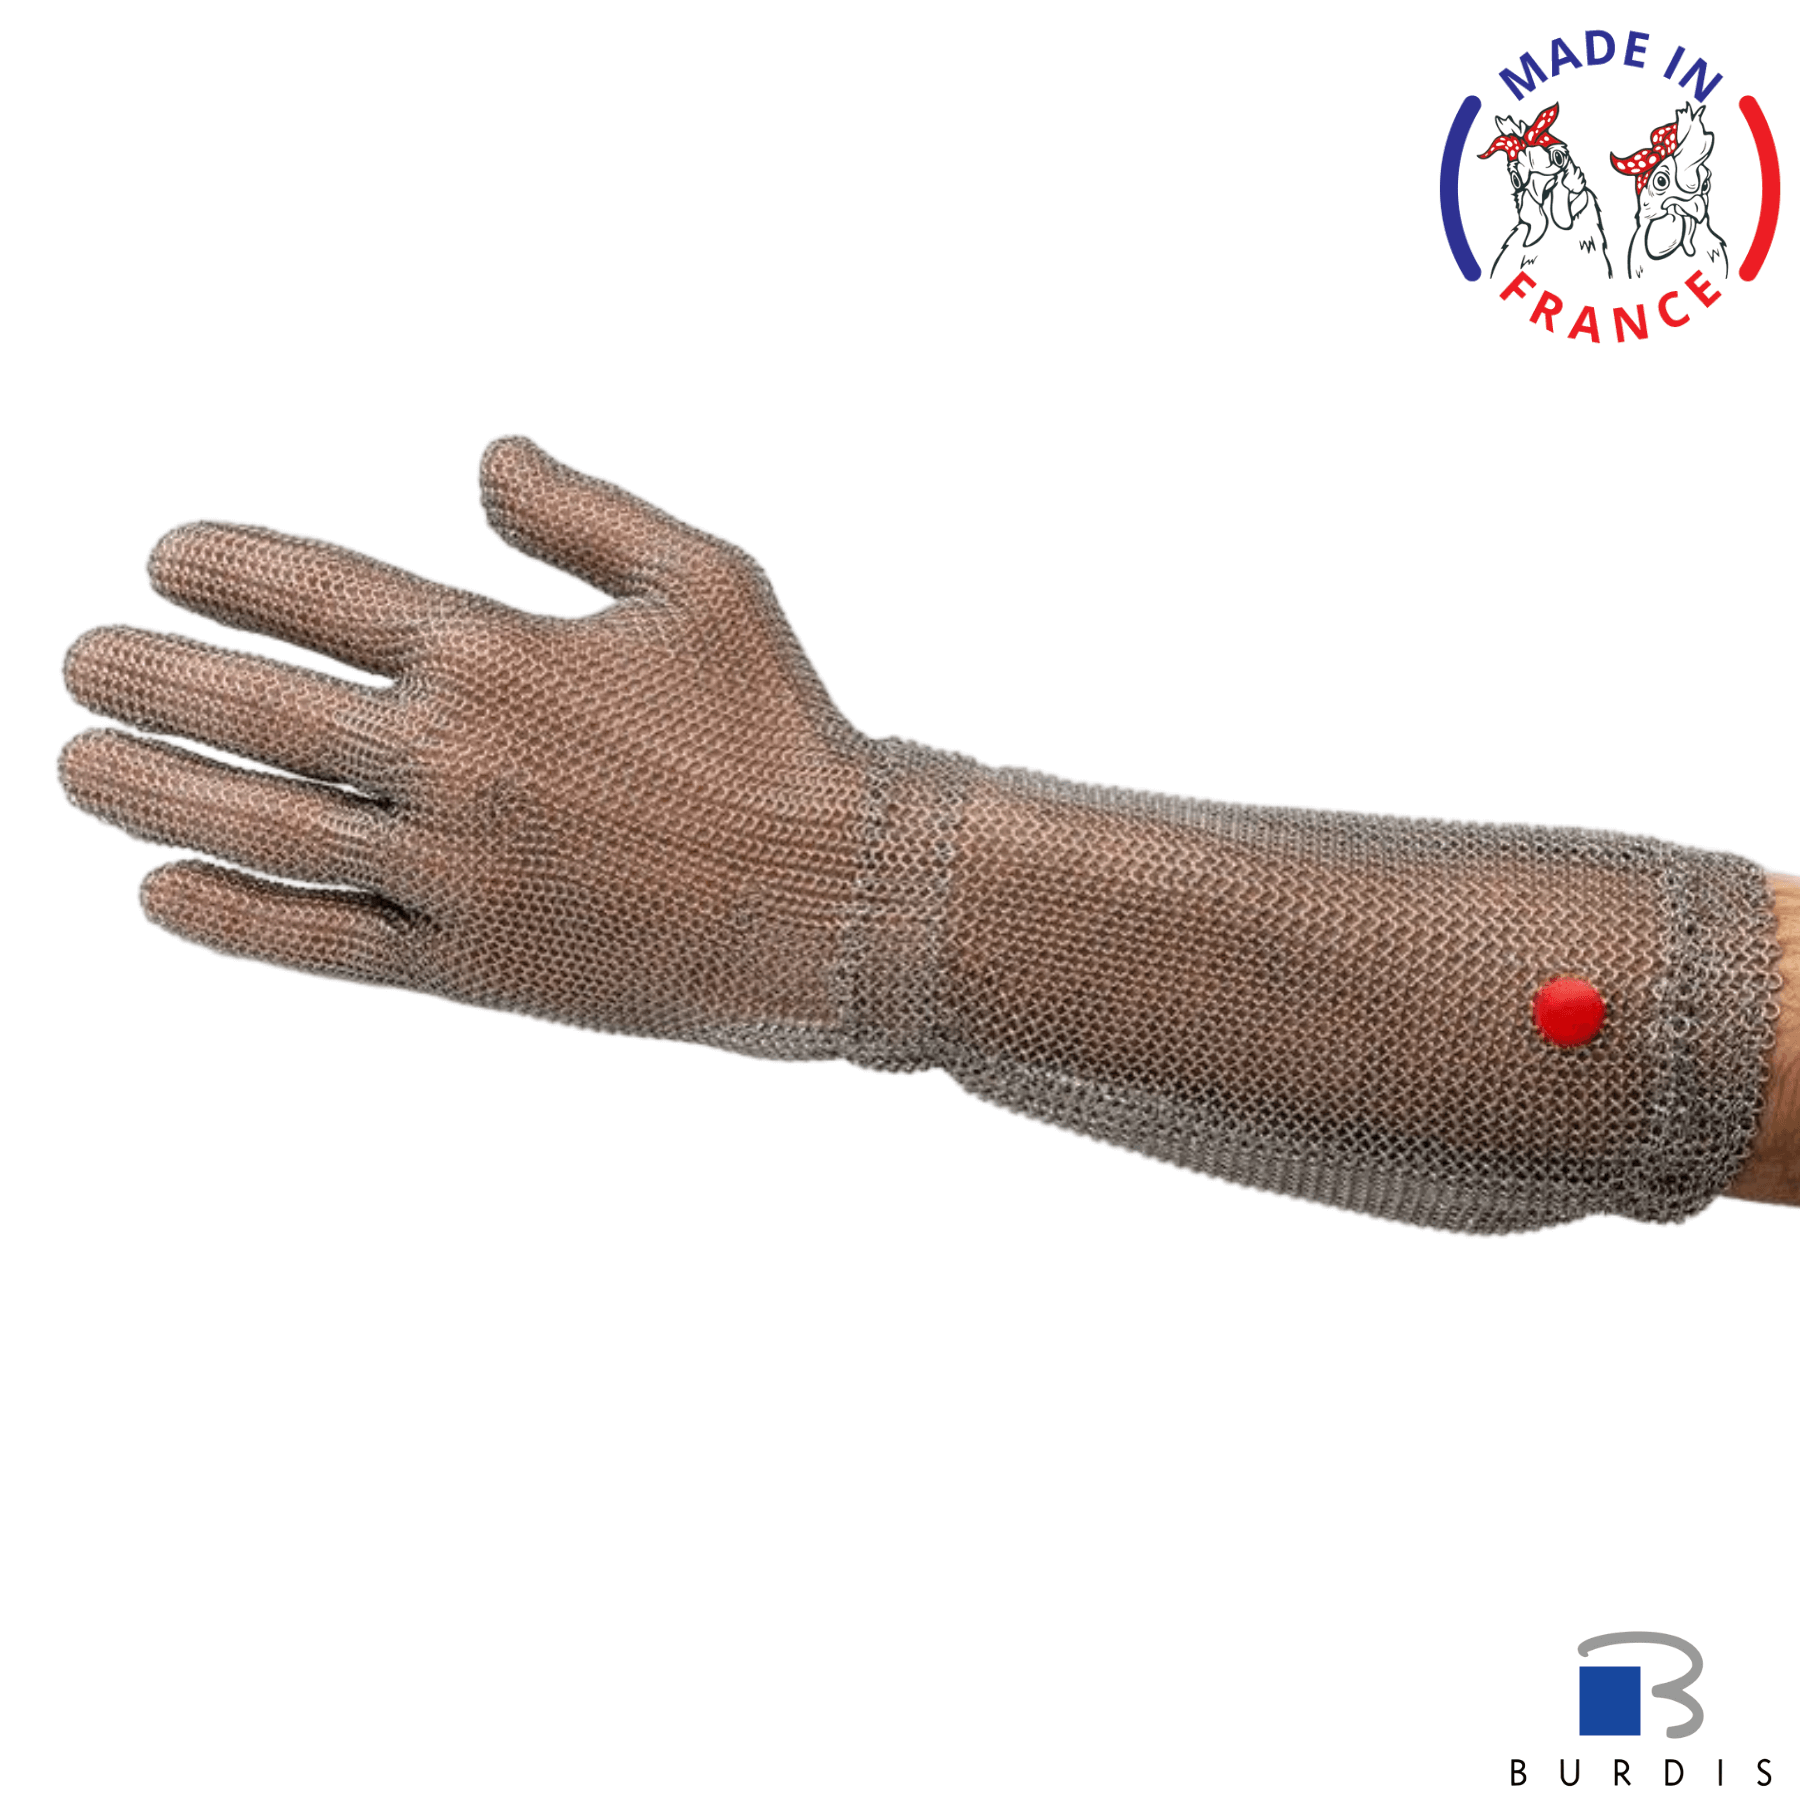 stainless steel - cut-resistant glove - XS - 6